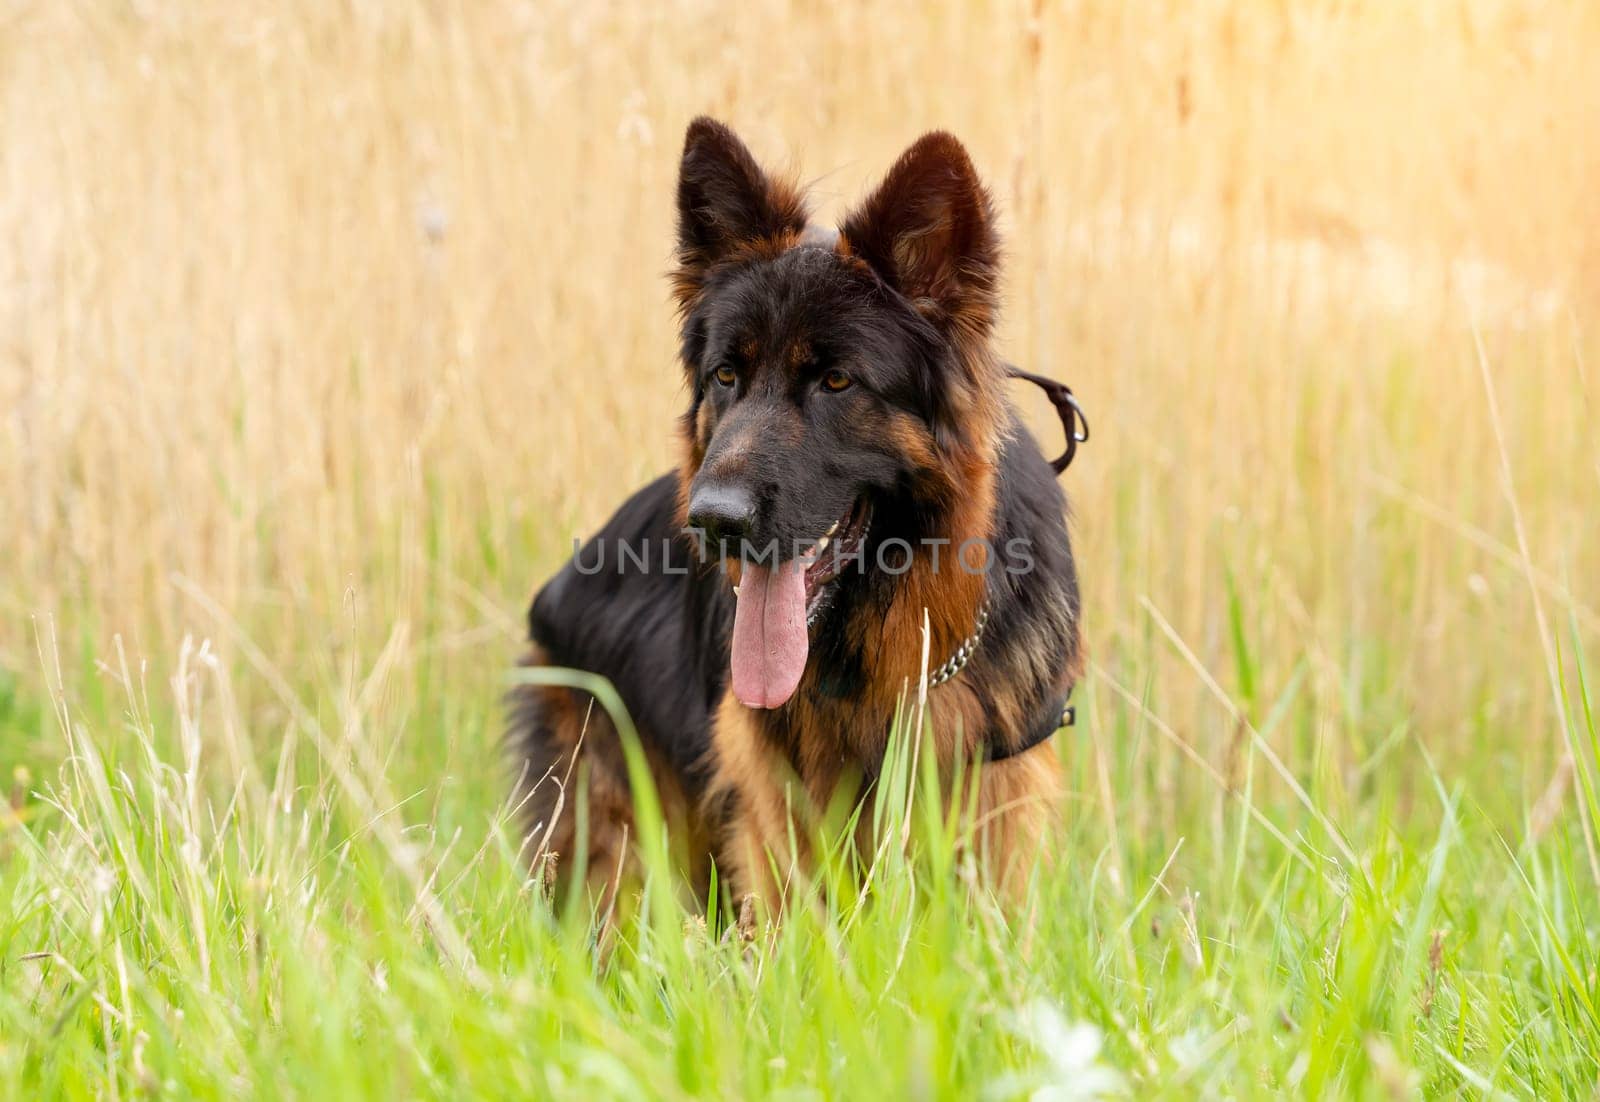 German shepherd dog in harness out for a walk lying, running, walking on the grass in sunny summer day